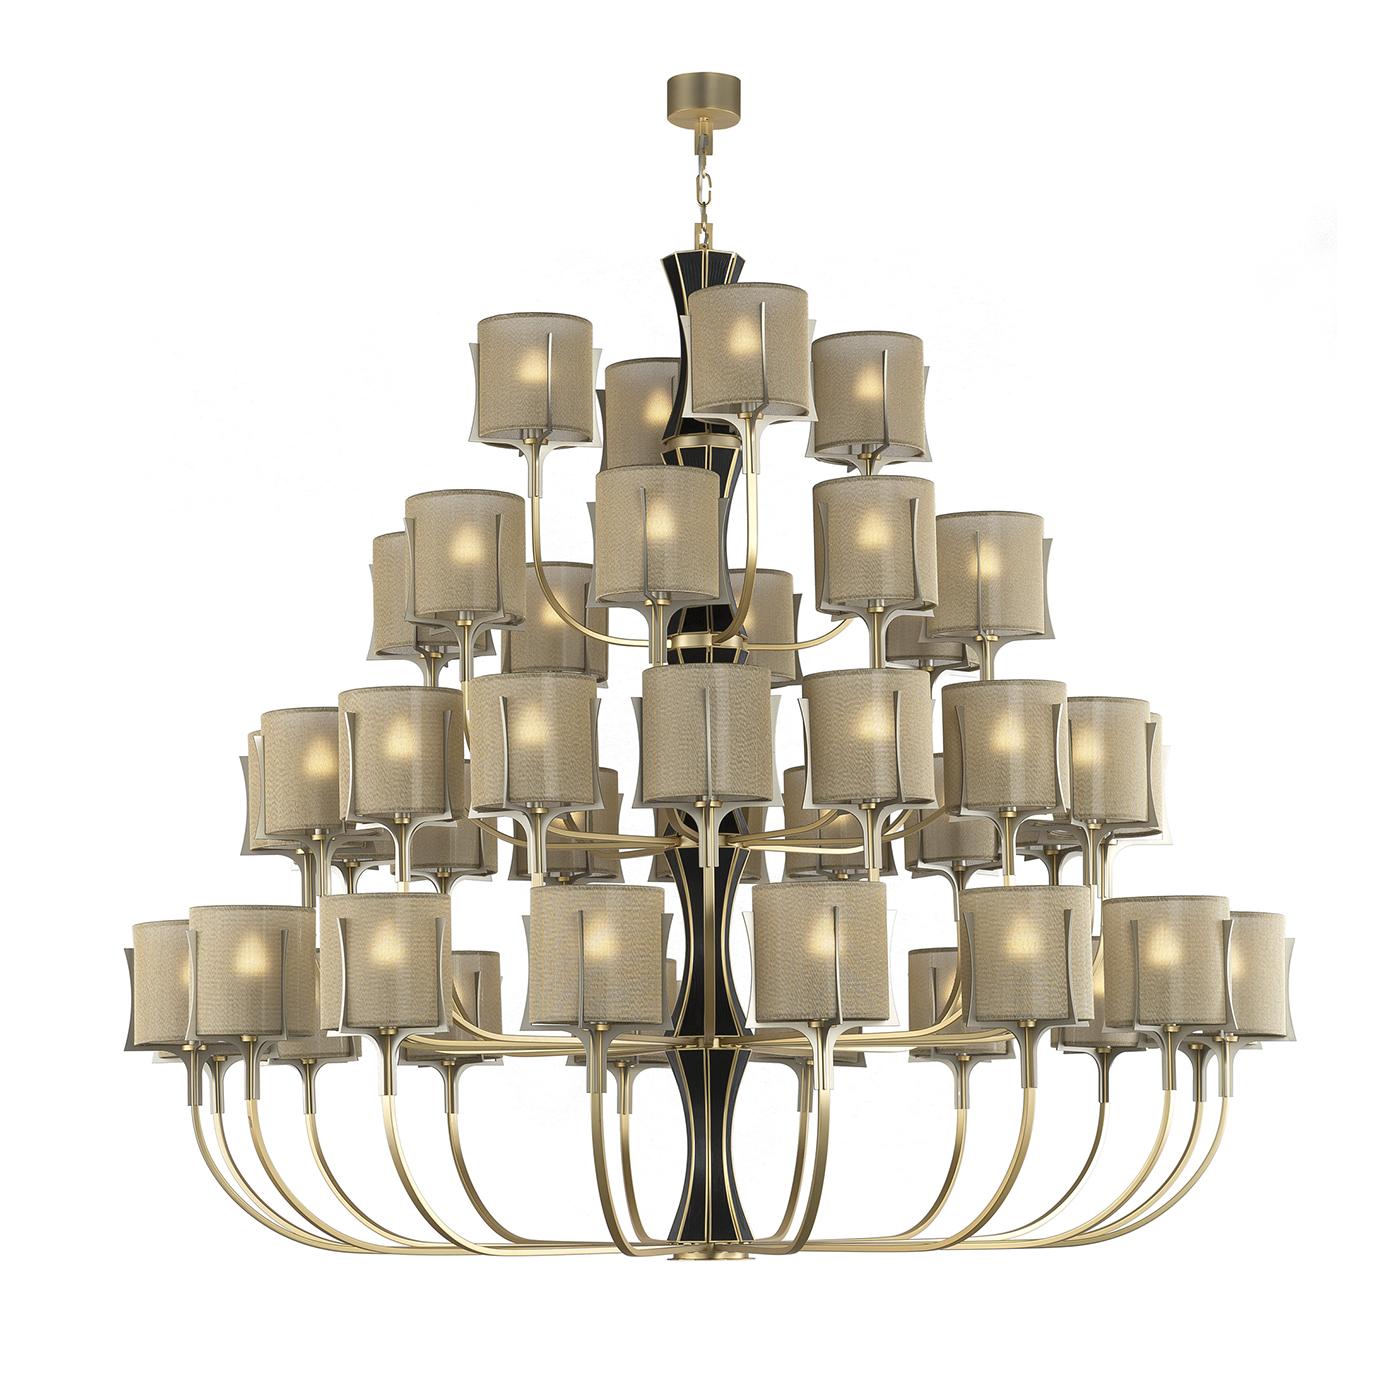 This magnificent chandelier is part of the New Flow collection and combines high-quality materials with a modern sensibility for a timeless final effect that makes this piece suitable for any decor. The four-layer structure is of natural-finished